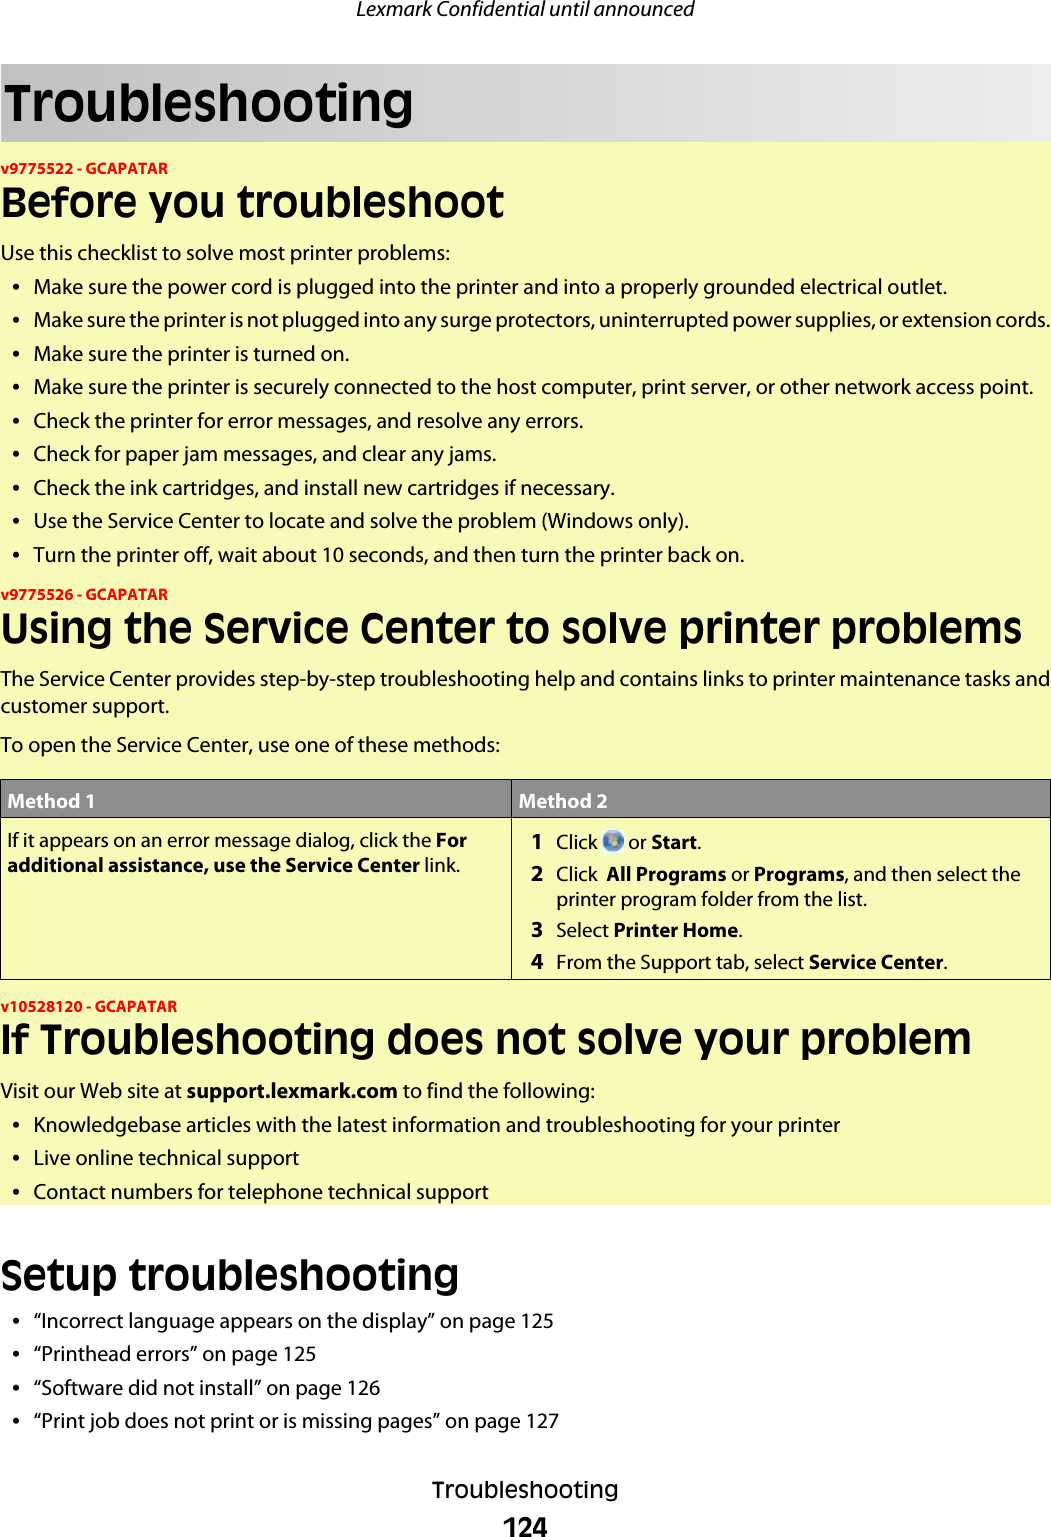 Troubleshootingv9775522 - GCAPATARBefore you troubleshootUse this checklist to solve most printer problems:•Make sure the power cord is plugged into the printer and into a properly grounded electrical outlet.•Make sure the printer is not plugged into any surge protectors, uninterrupted power supplies, or extension cords.•Make sure the printer is turned on.•Make sure the printer is securely connected to the host computer, print server, or other network access point.•Check the printer for error messages, and resolve any errors.•Check for paper jam messages, and clear any jams.•Check the ink cartridges, and install new cartridges if necessary.•Use the Service Center to locate and solve the problem (Windows only).•Turn the printer off, wait about 10 seconds, and then turn the printer back on.v9775526 - GCAPATARUsing the Service Center to solve printer problemsThe Service Center provides step-by-step troubleshooting help and contains links to printer maintenance tasks andcustomer support.To open the Service Center, use one of these methods:Method 1 Method 2If it appears on an error message dialog, click the Foradditional assistance, use the Service Center link. 1Click   or Start.2Click  All Programs or Programs, and then select theprinter program folder from the list.3Select Printer Home.4From the Support tab, select Service Center.v10528120 - GCAPATARIf Troubleshooting does not solve your problemVisit our Web site at support.lexmark.com to find the following:•Knowledgebase articles with the latest information and troubleshooting for your printer•Live online technical support•Contact numbers for telephone technical supportSetup troubleshooting•“Incorrect language appears on the display” on page 125•“Printhead errors” on page 125•“Software did not install” on page 126•“Print job does not print or is missing pages” on page 127Lexmark Confidential until announcedTroubleshooting124